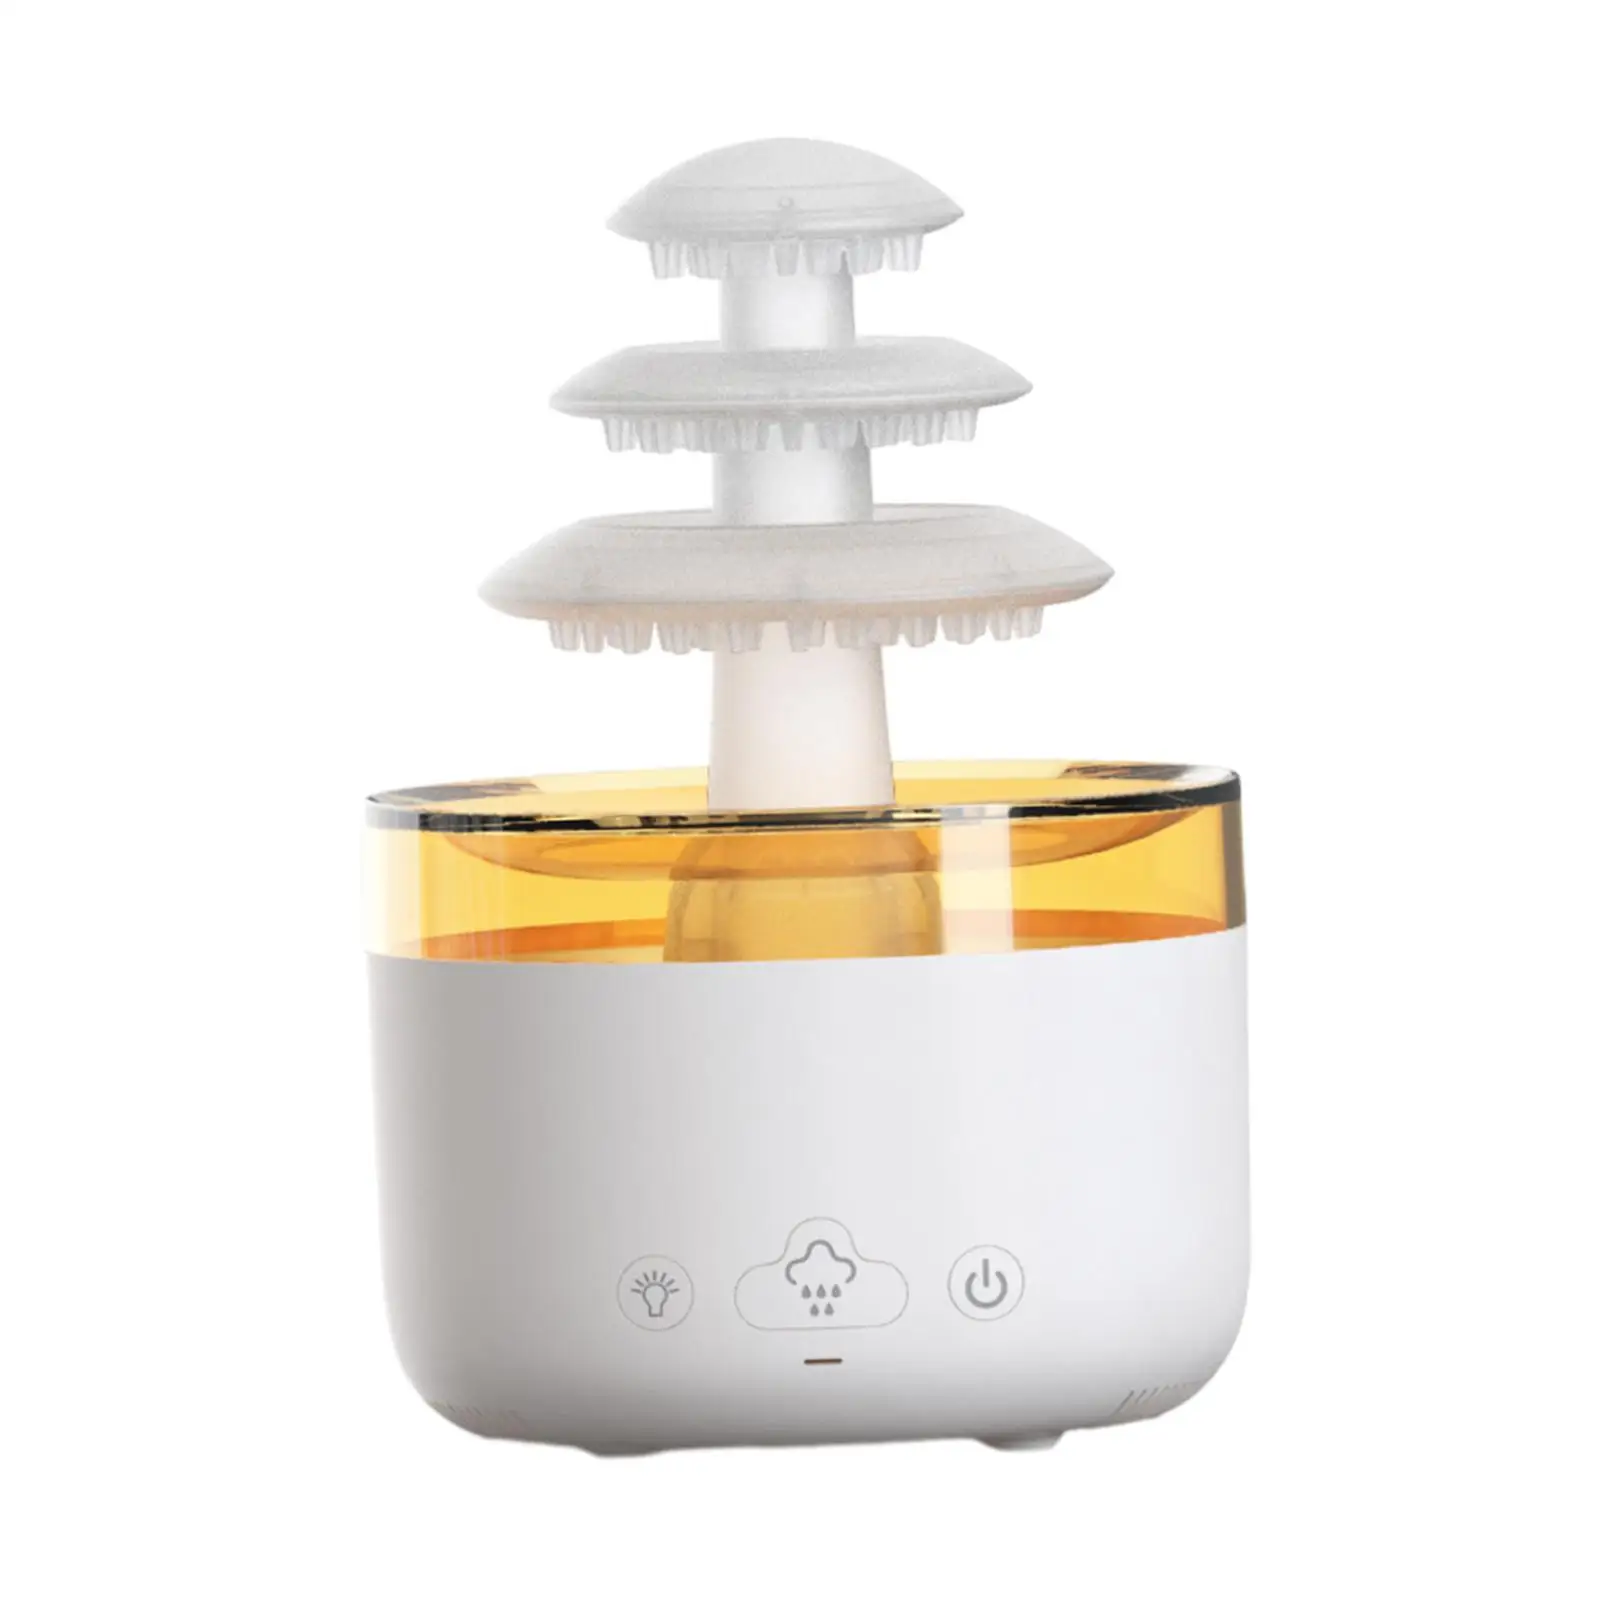 Essential Oil Diffuser Premium Bass Noise Reduction Ornaments 500ml Air Humidifier for Toilet Car Bathroom Bedroom Study